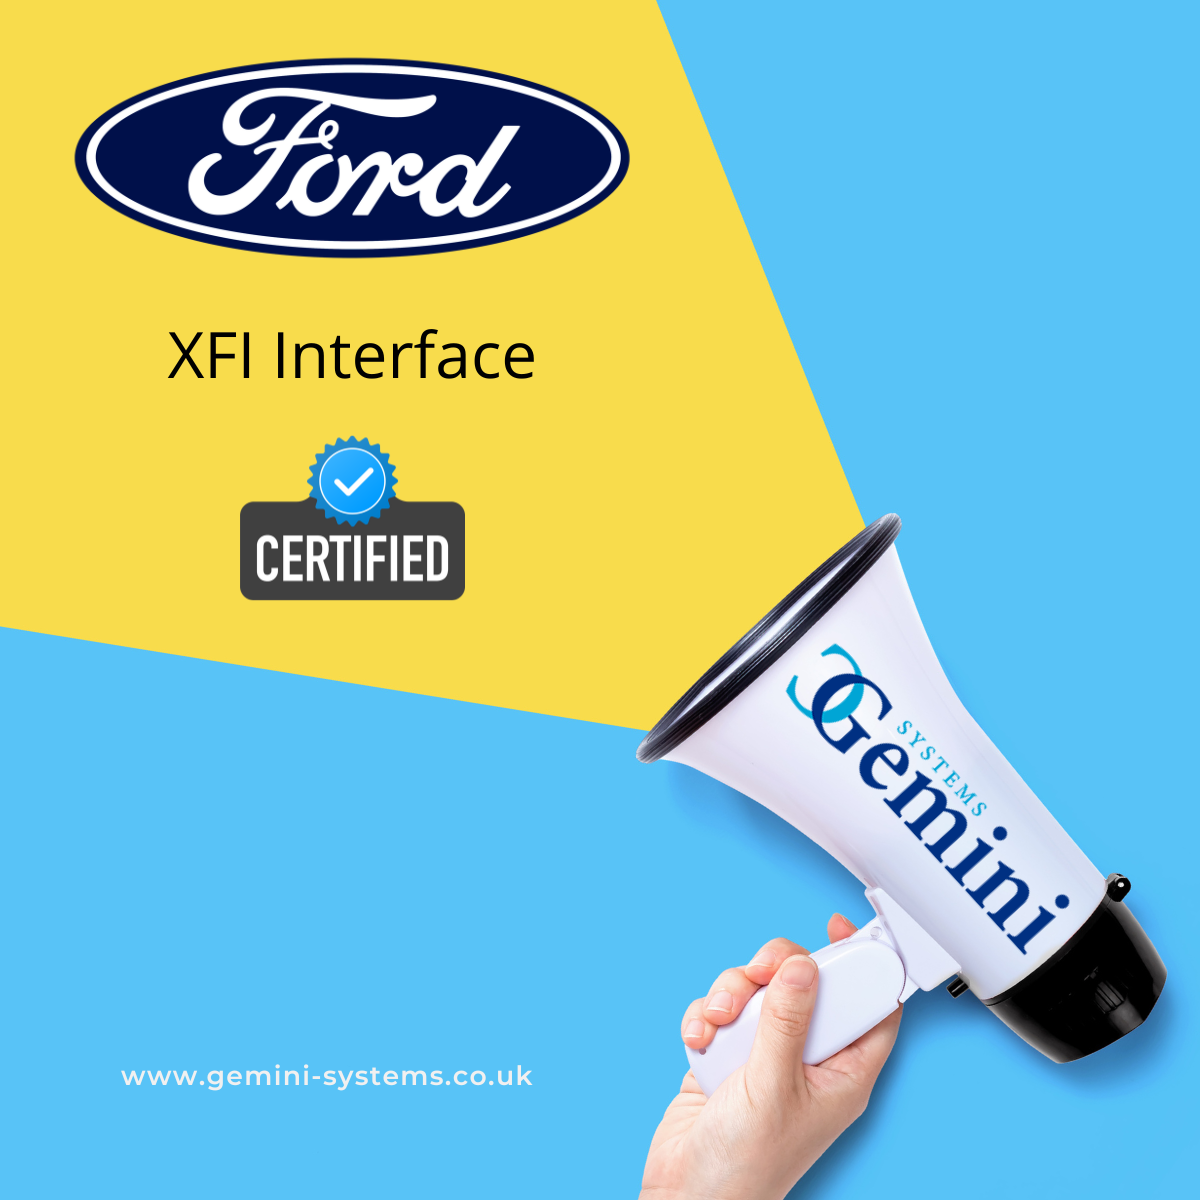 Gemini Systems is proud to achieve XFI certification.